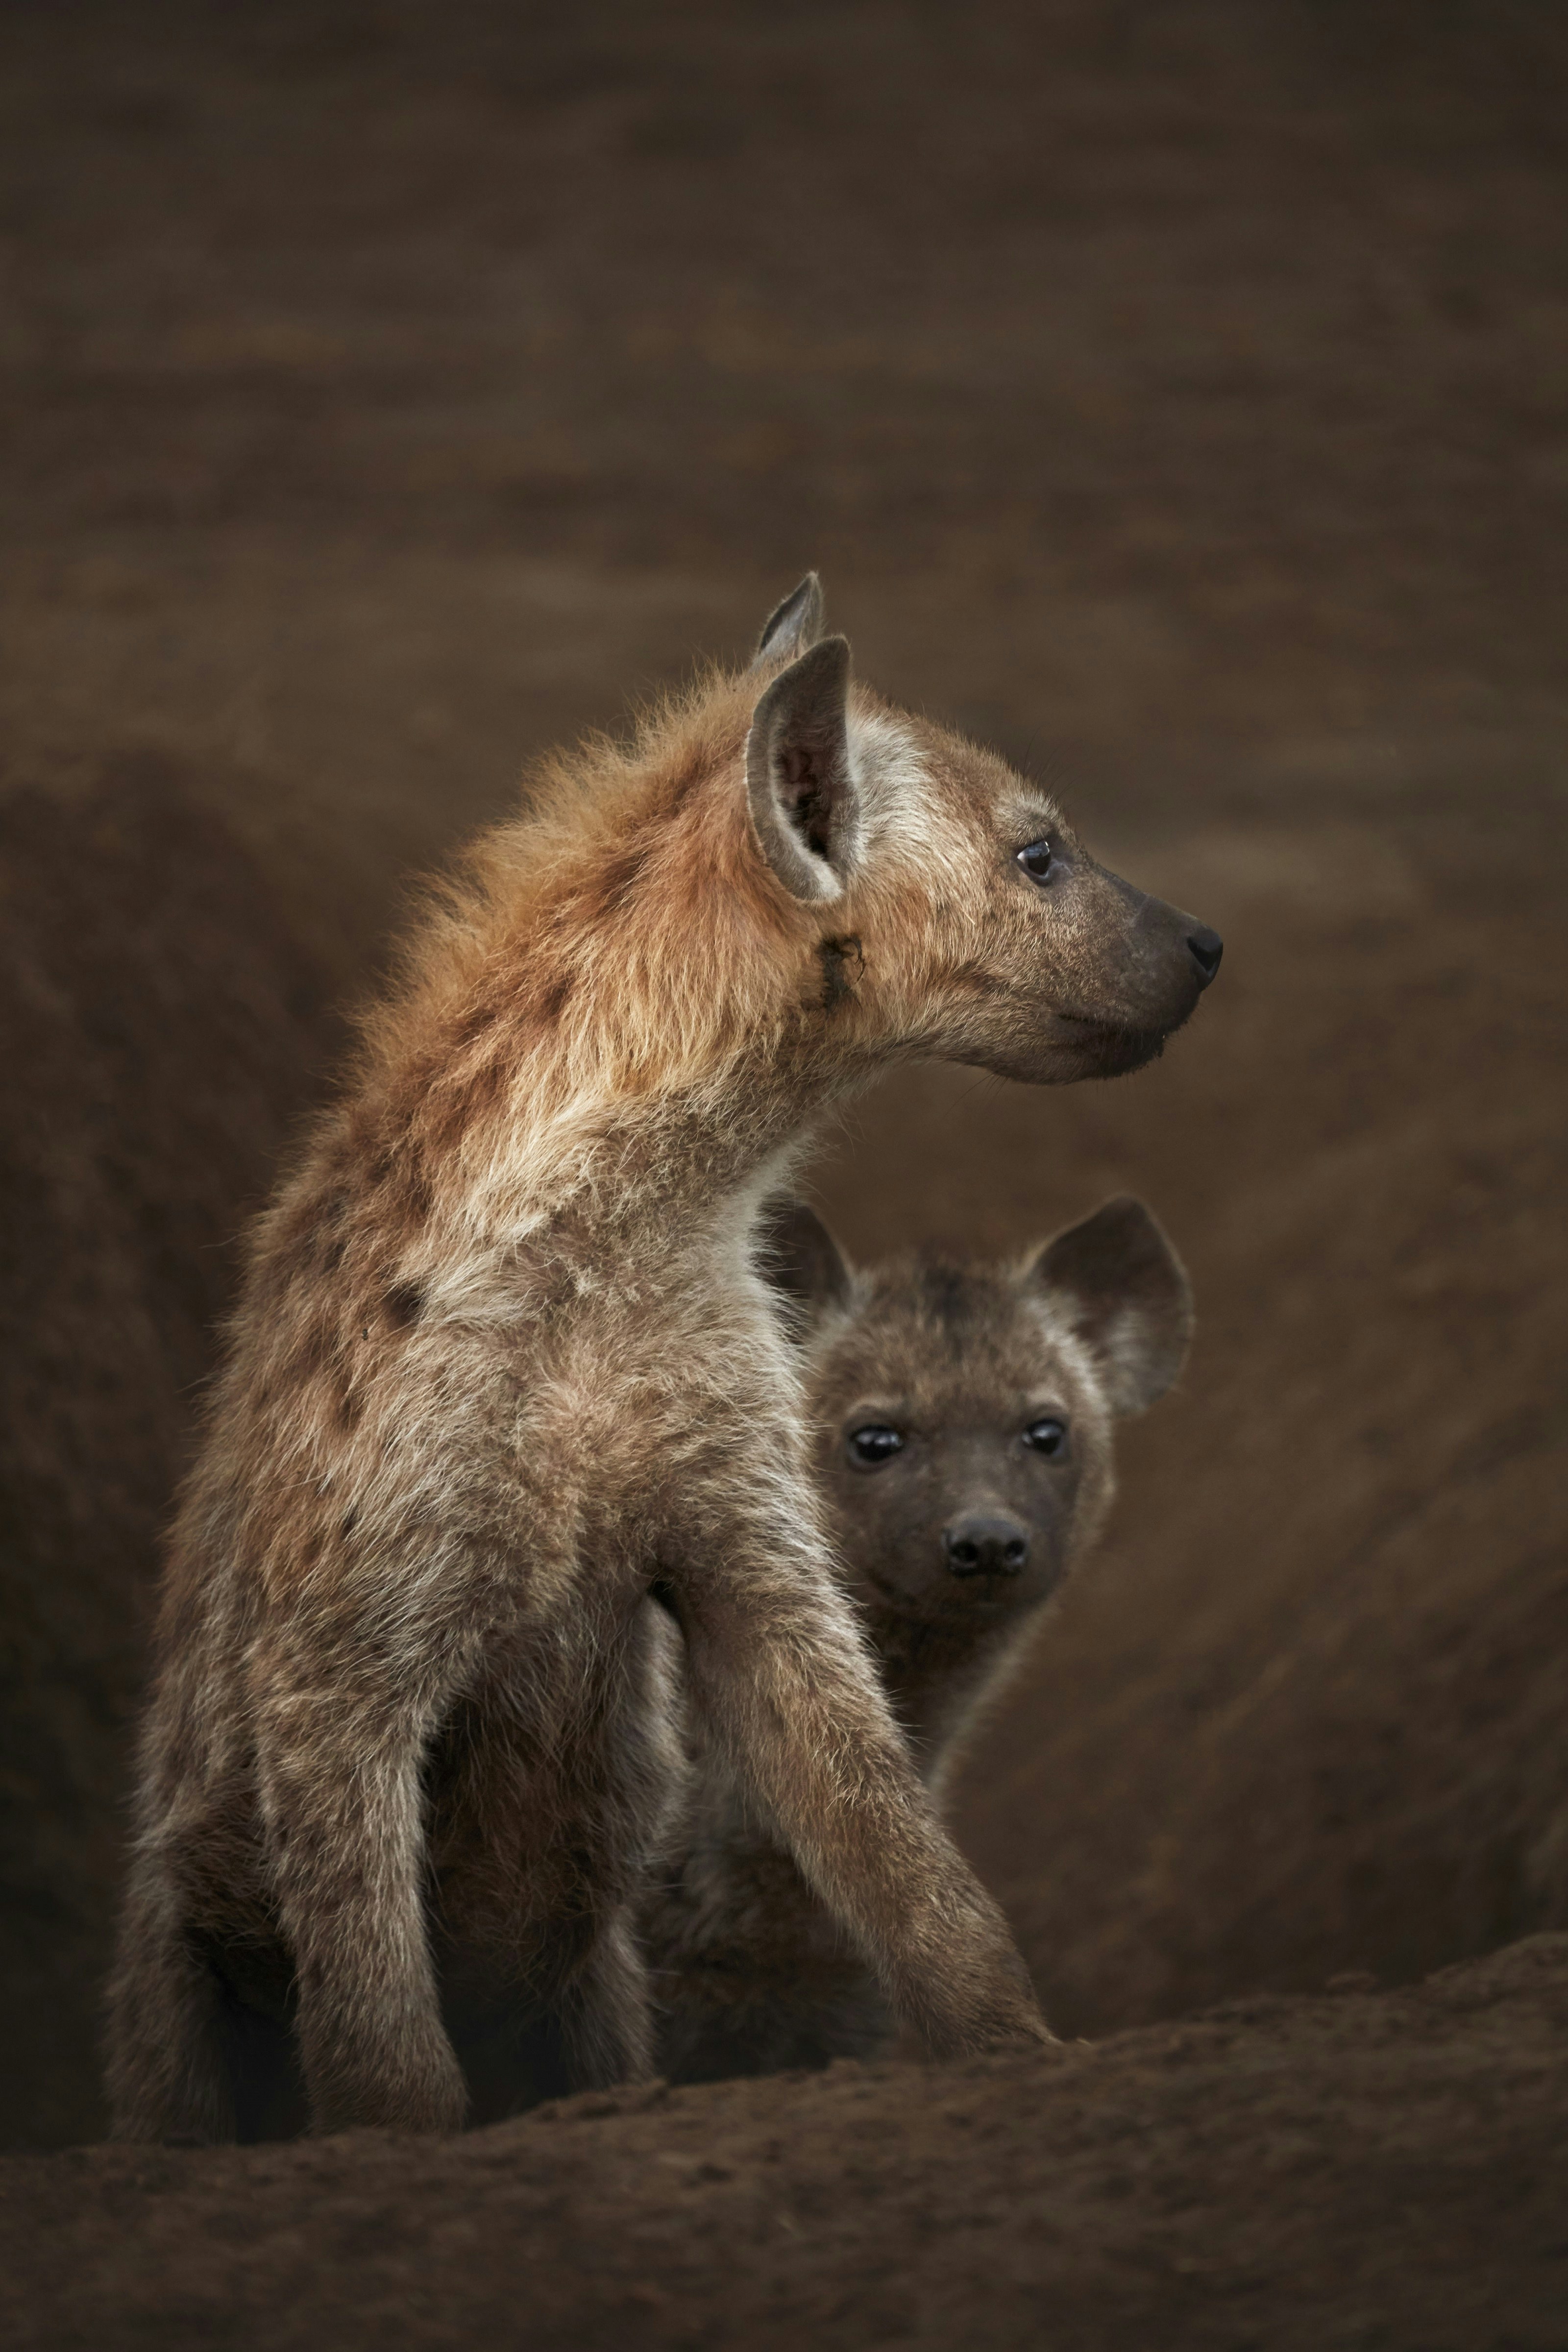 Two young hyenas emerge from their den; the one in the front looks to its left, while the smaller one behind stares at the camera.